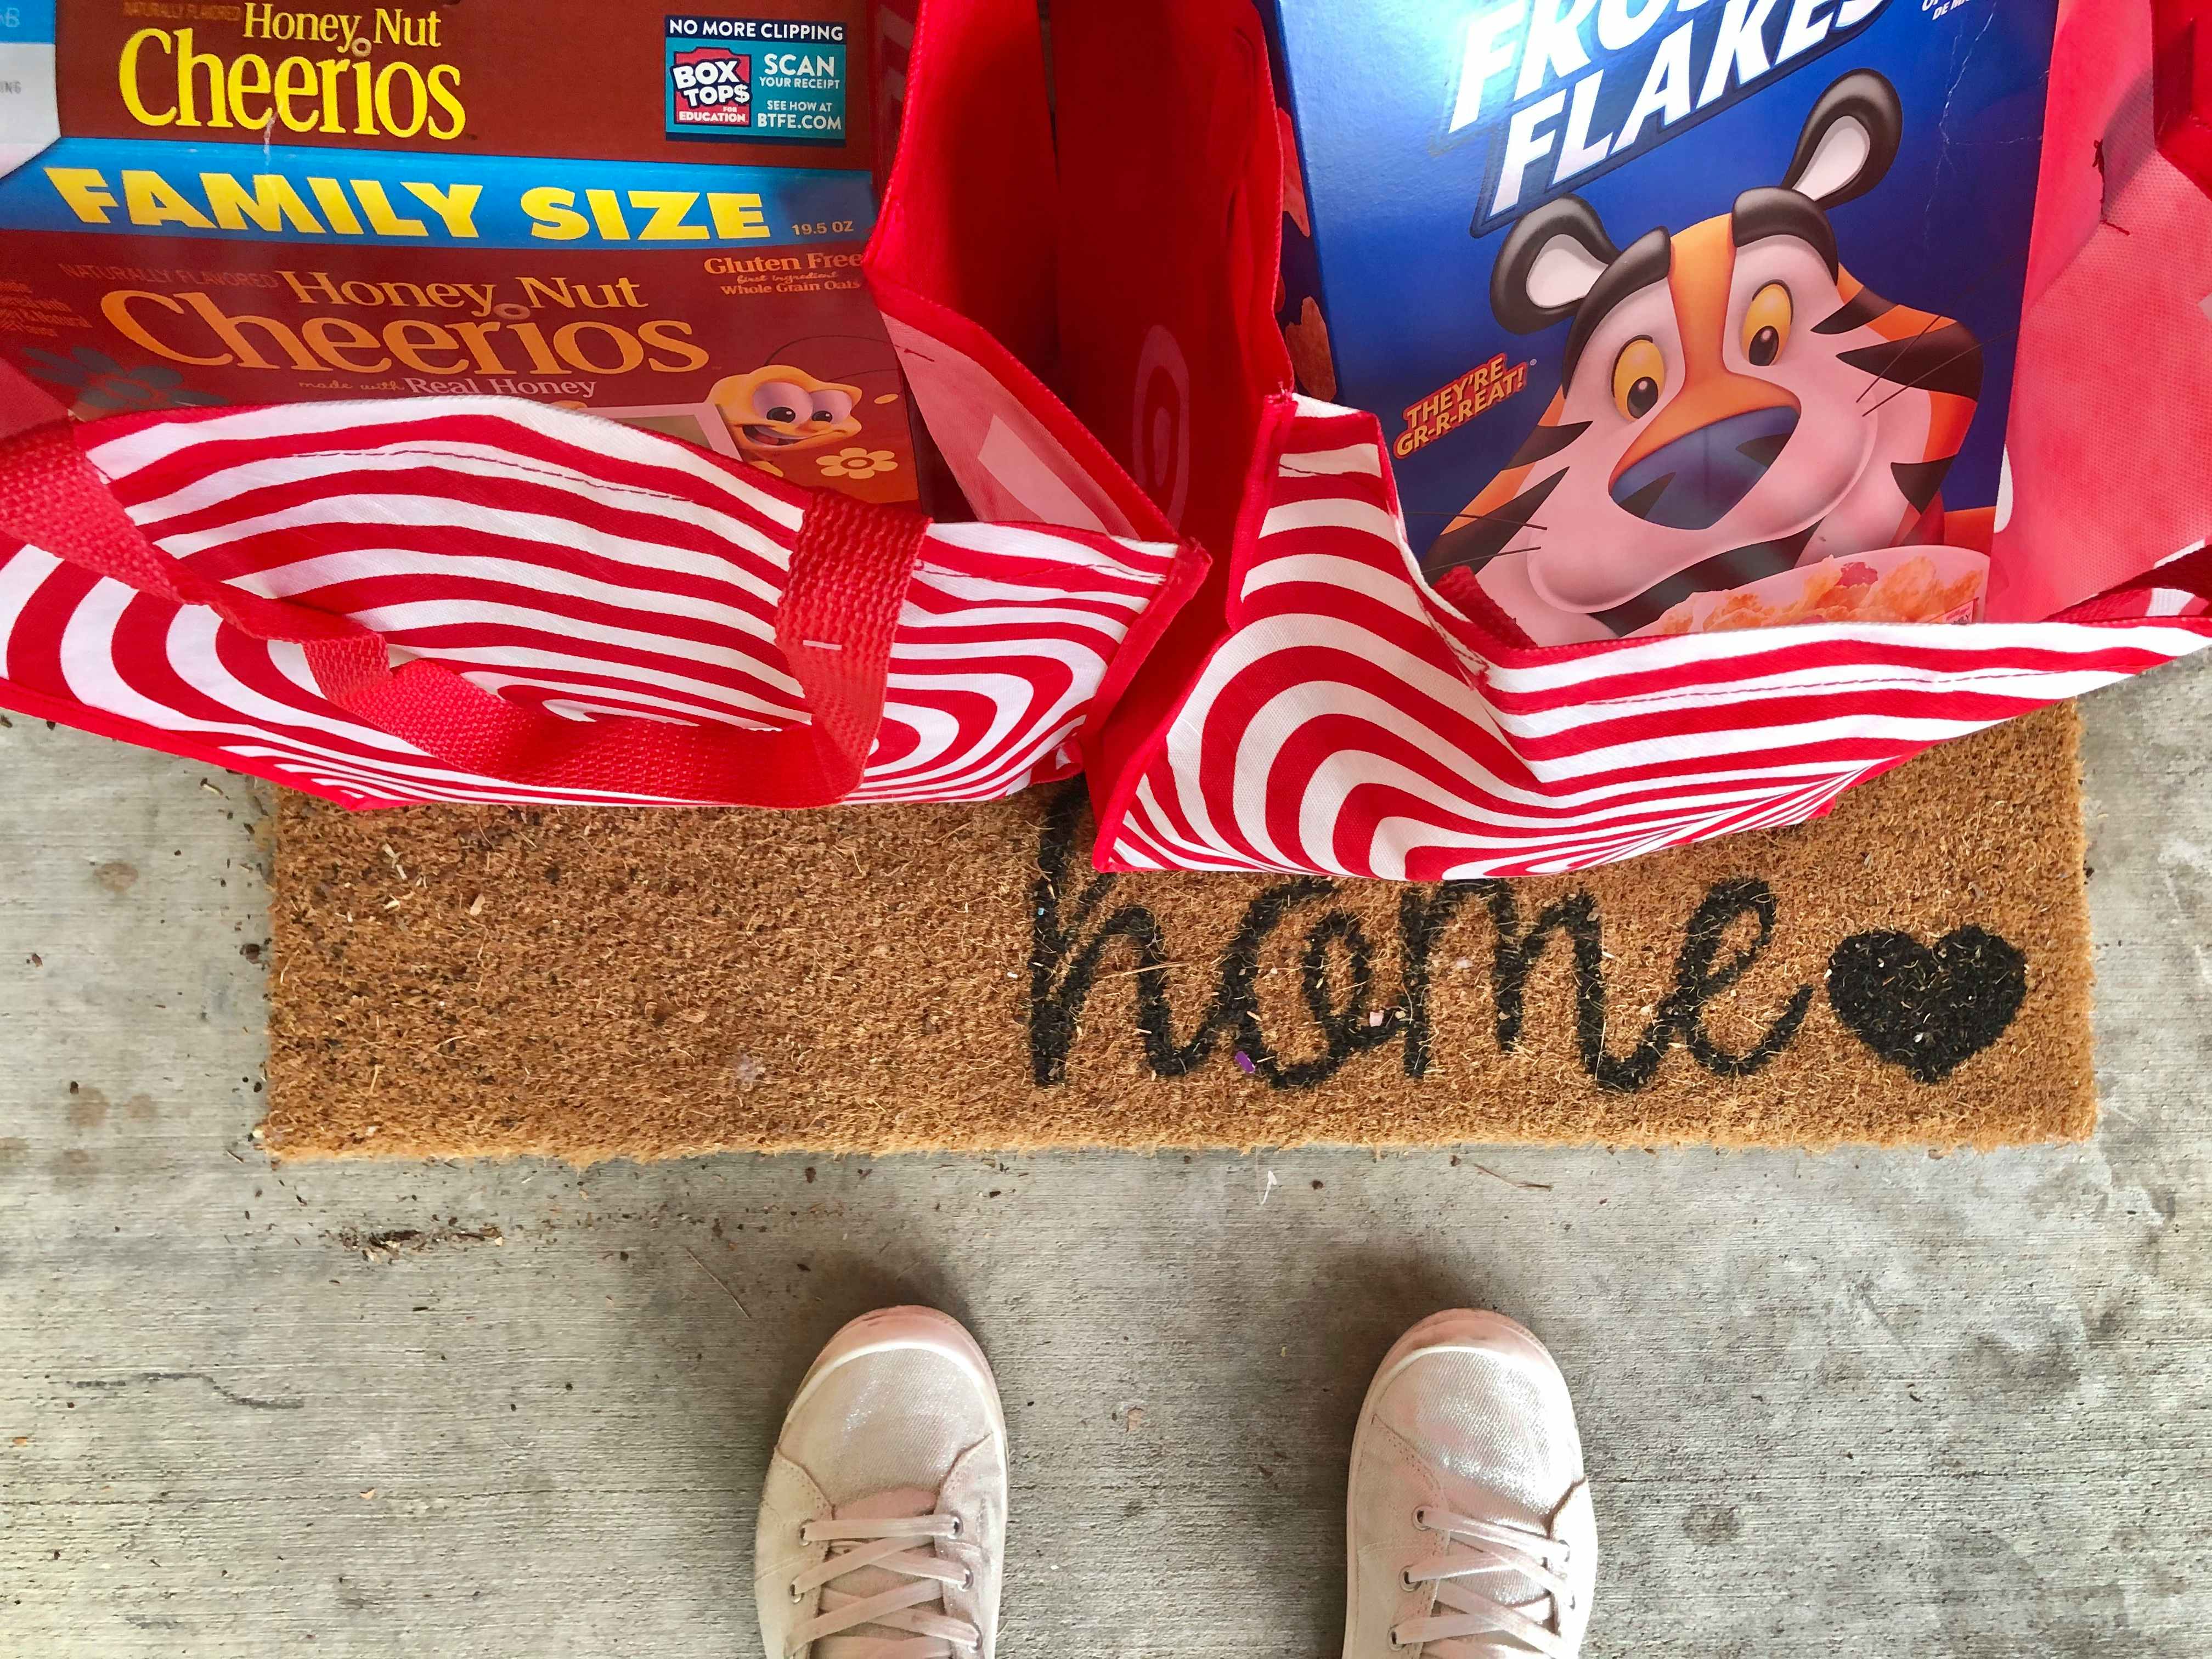 Woman standing over Target reusable bags with cereal on front doorstep.